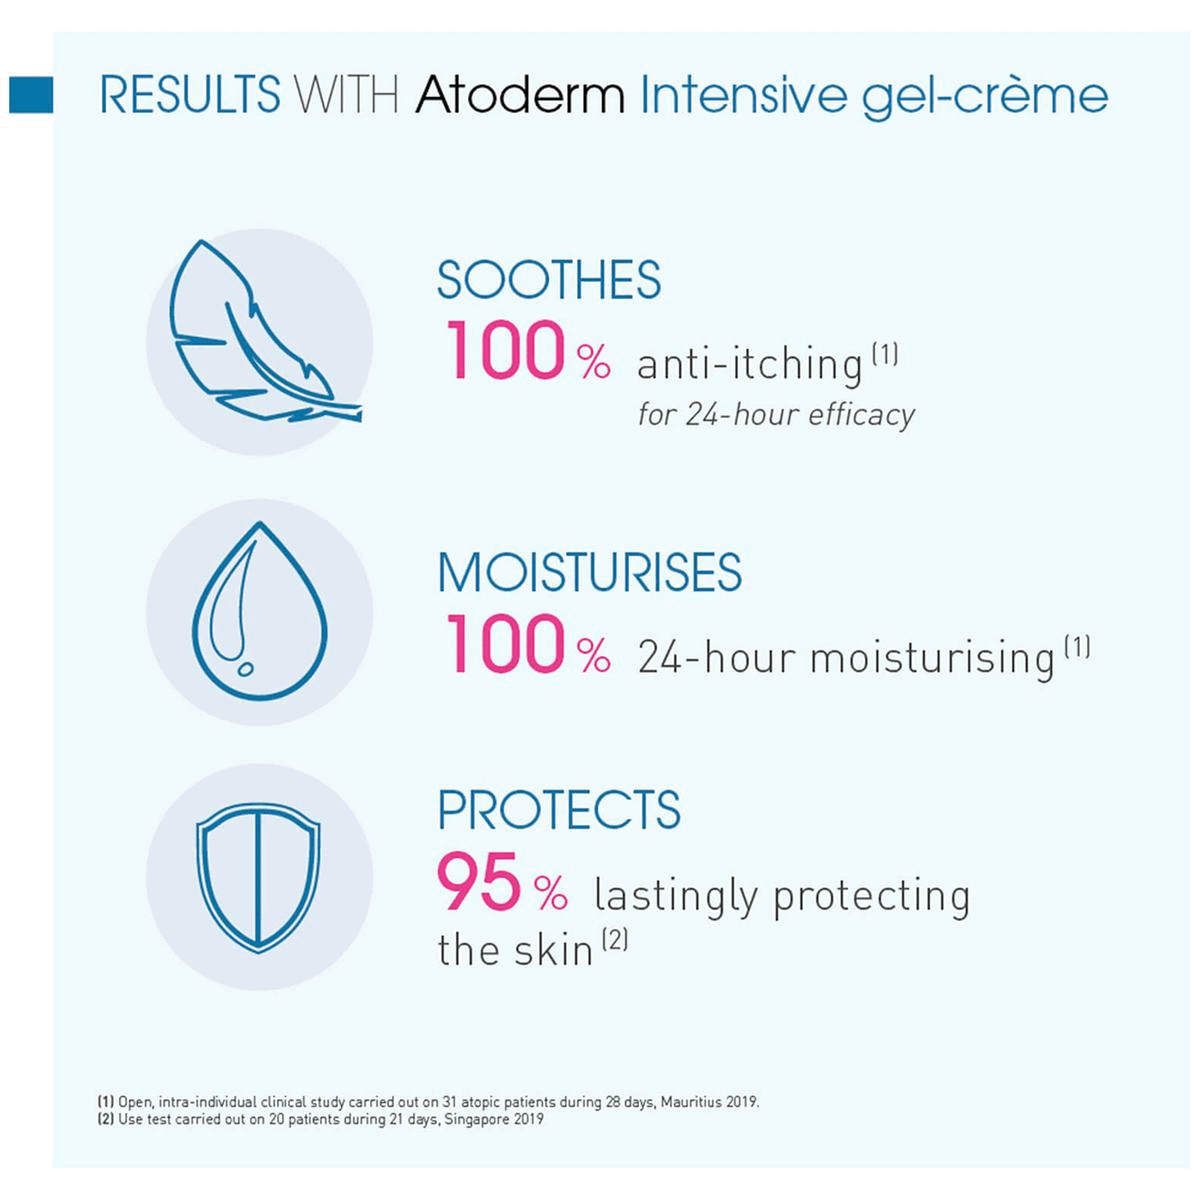 Results with atoderm intensive gel-creme. Your routine with atoderm intensive gel-creme